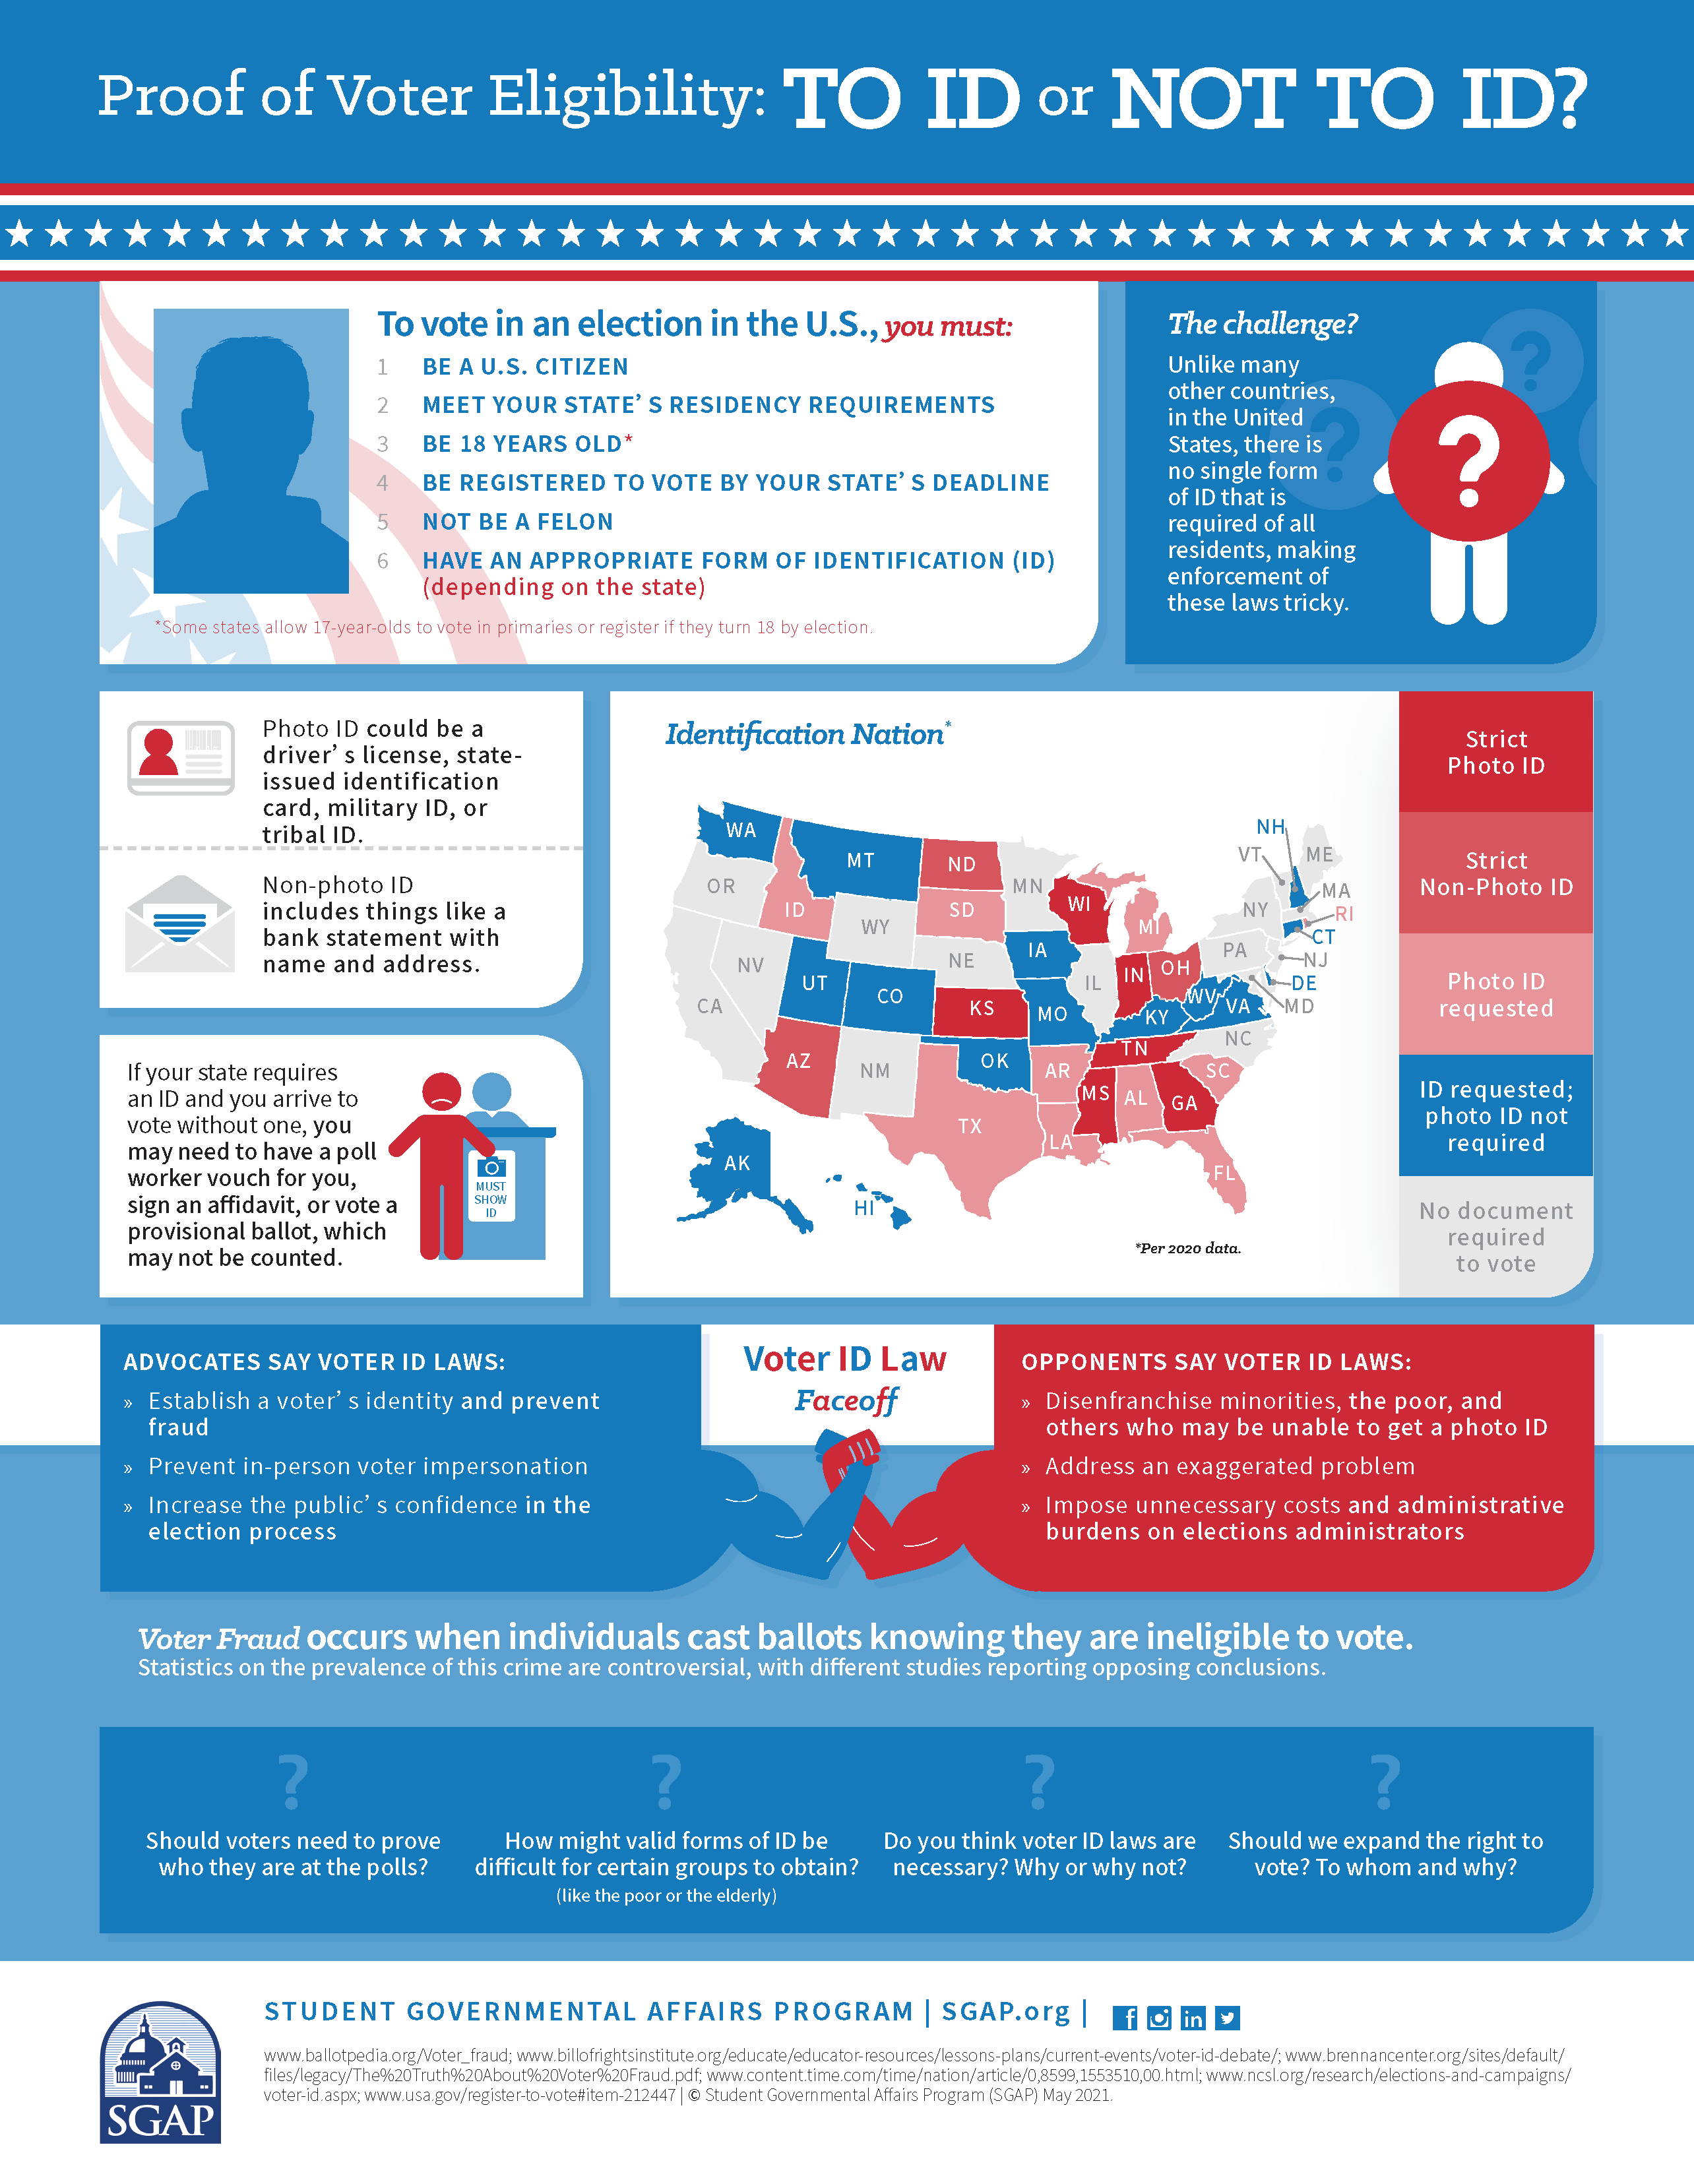 Proof of Voter Eligibility (Voter ID Laws) Infographic